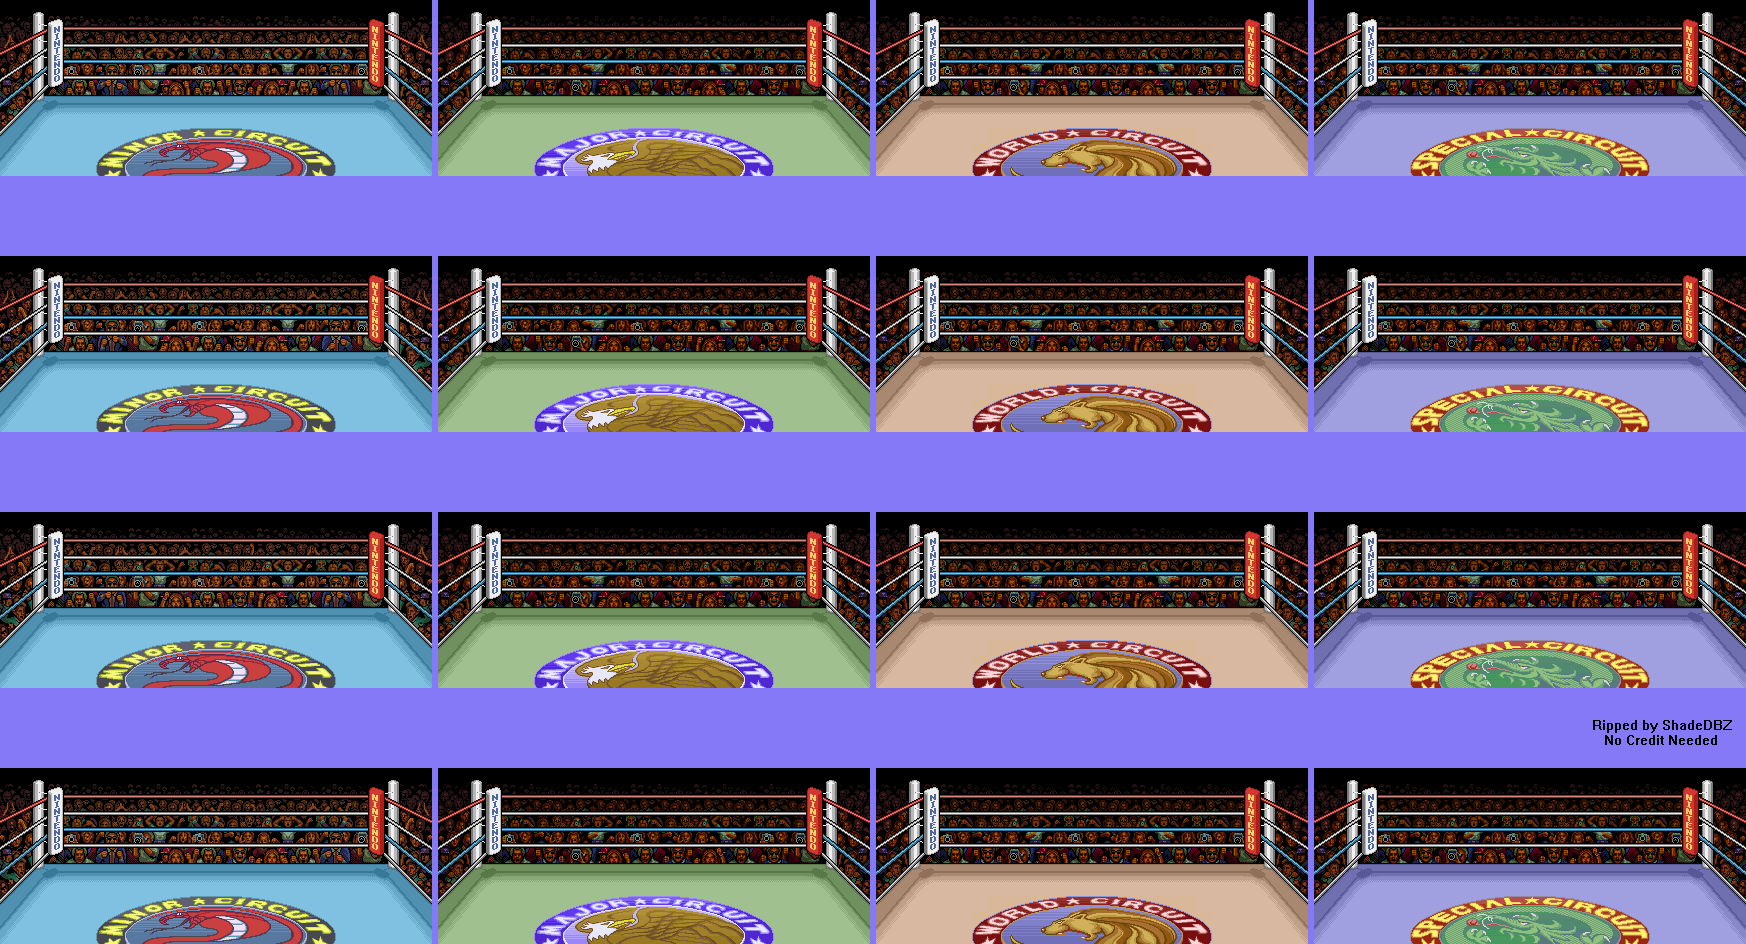 Super Punch-Out!! - Boxing Rings